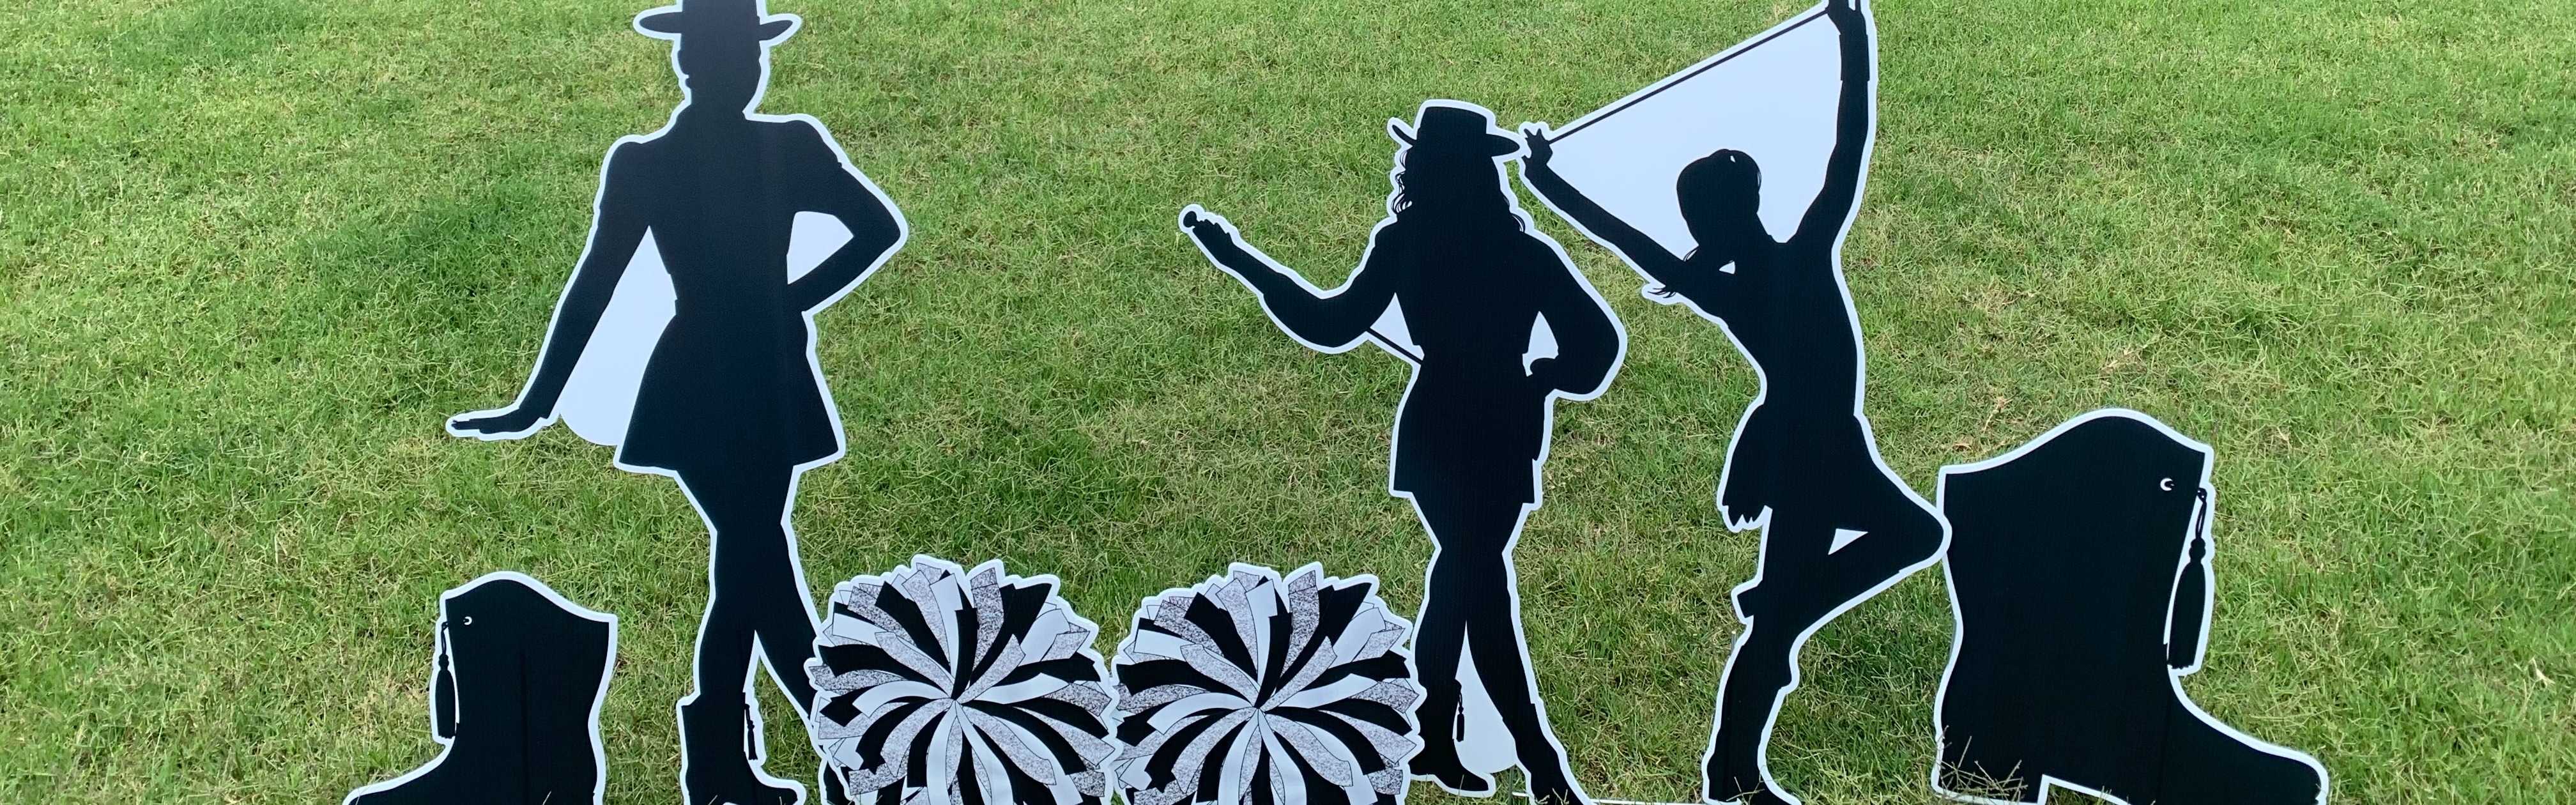 Yard card sign collection silhouette drillteam 